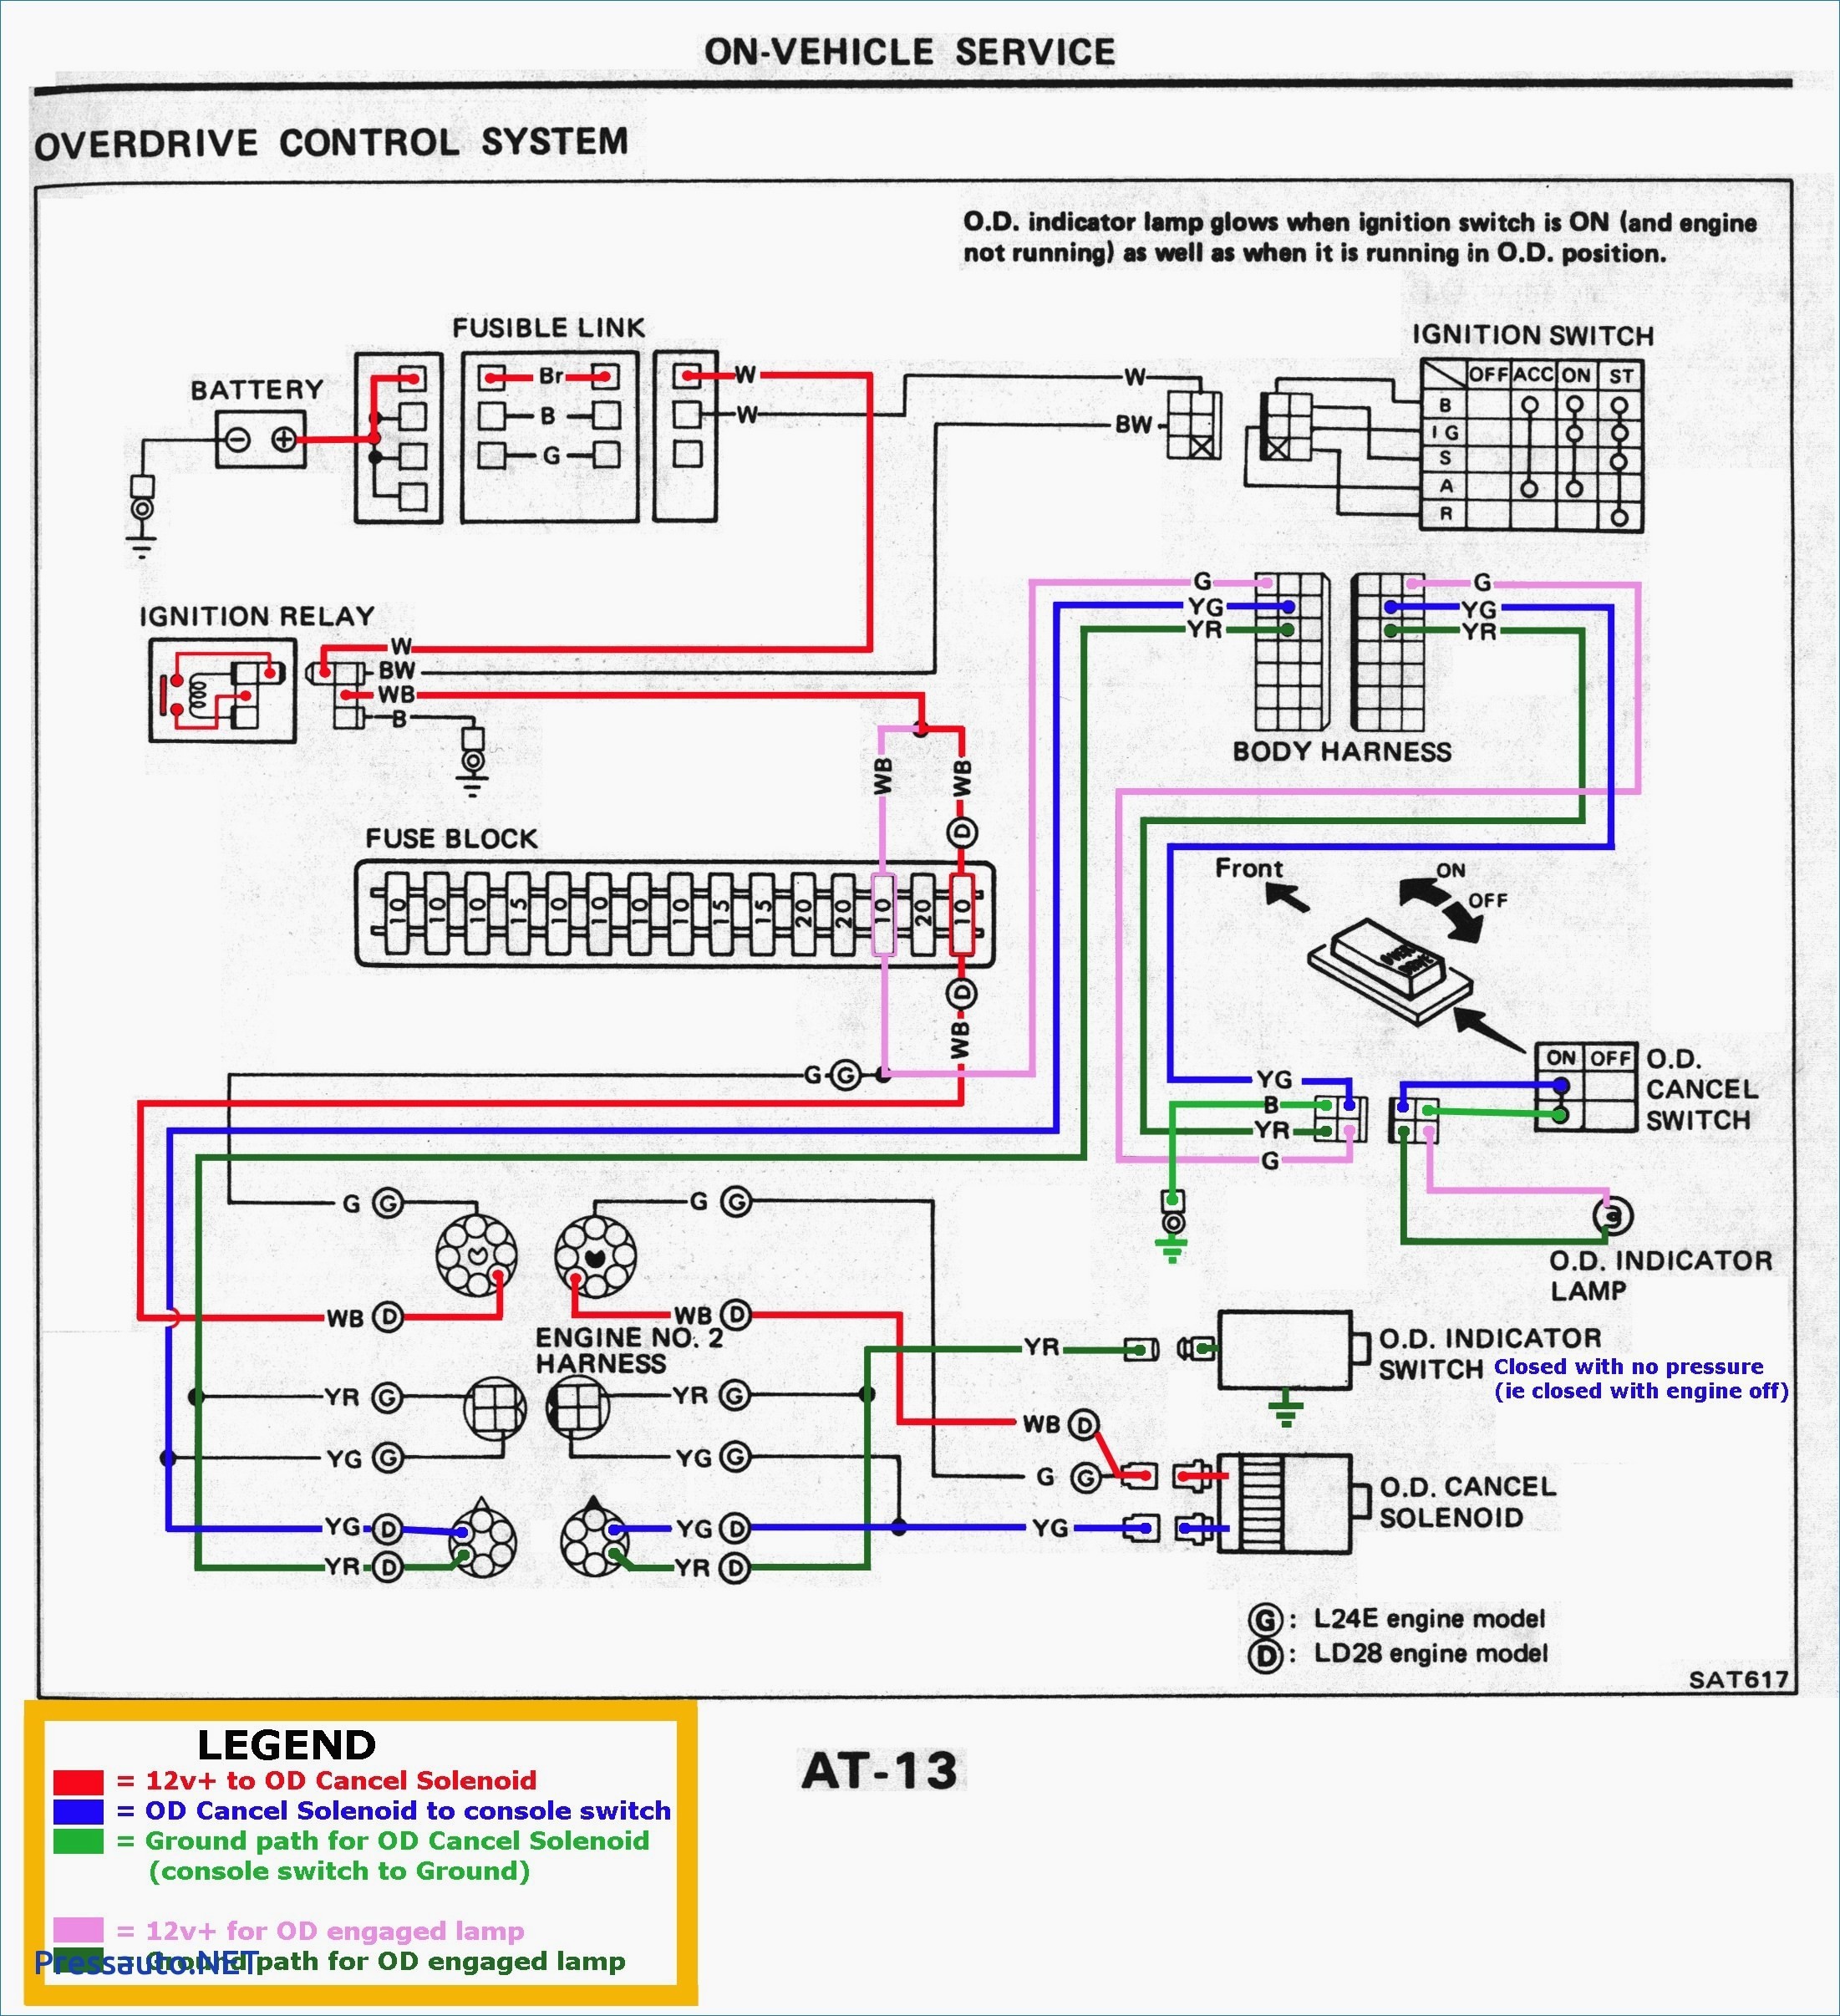 Universal Ignition Switch Wiring Diagram Elegant Magnificent Wiring Diagrams Mazda B2600 Electrical